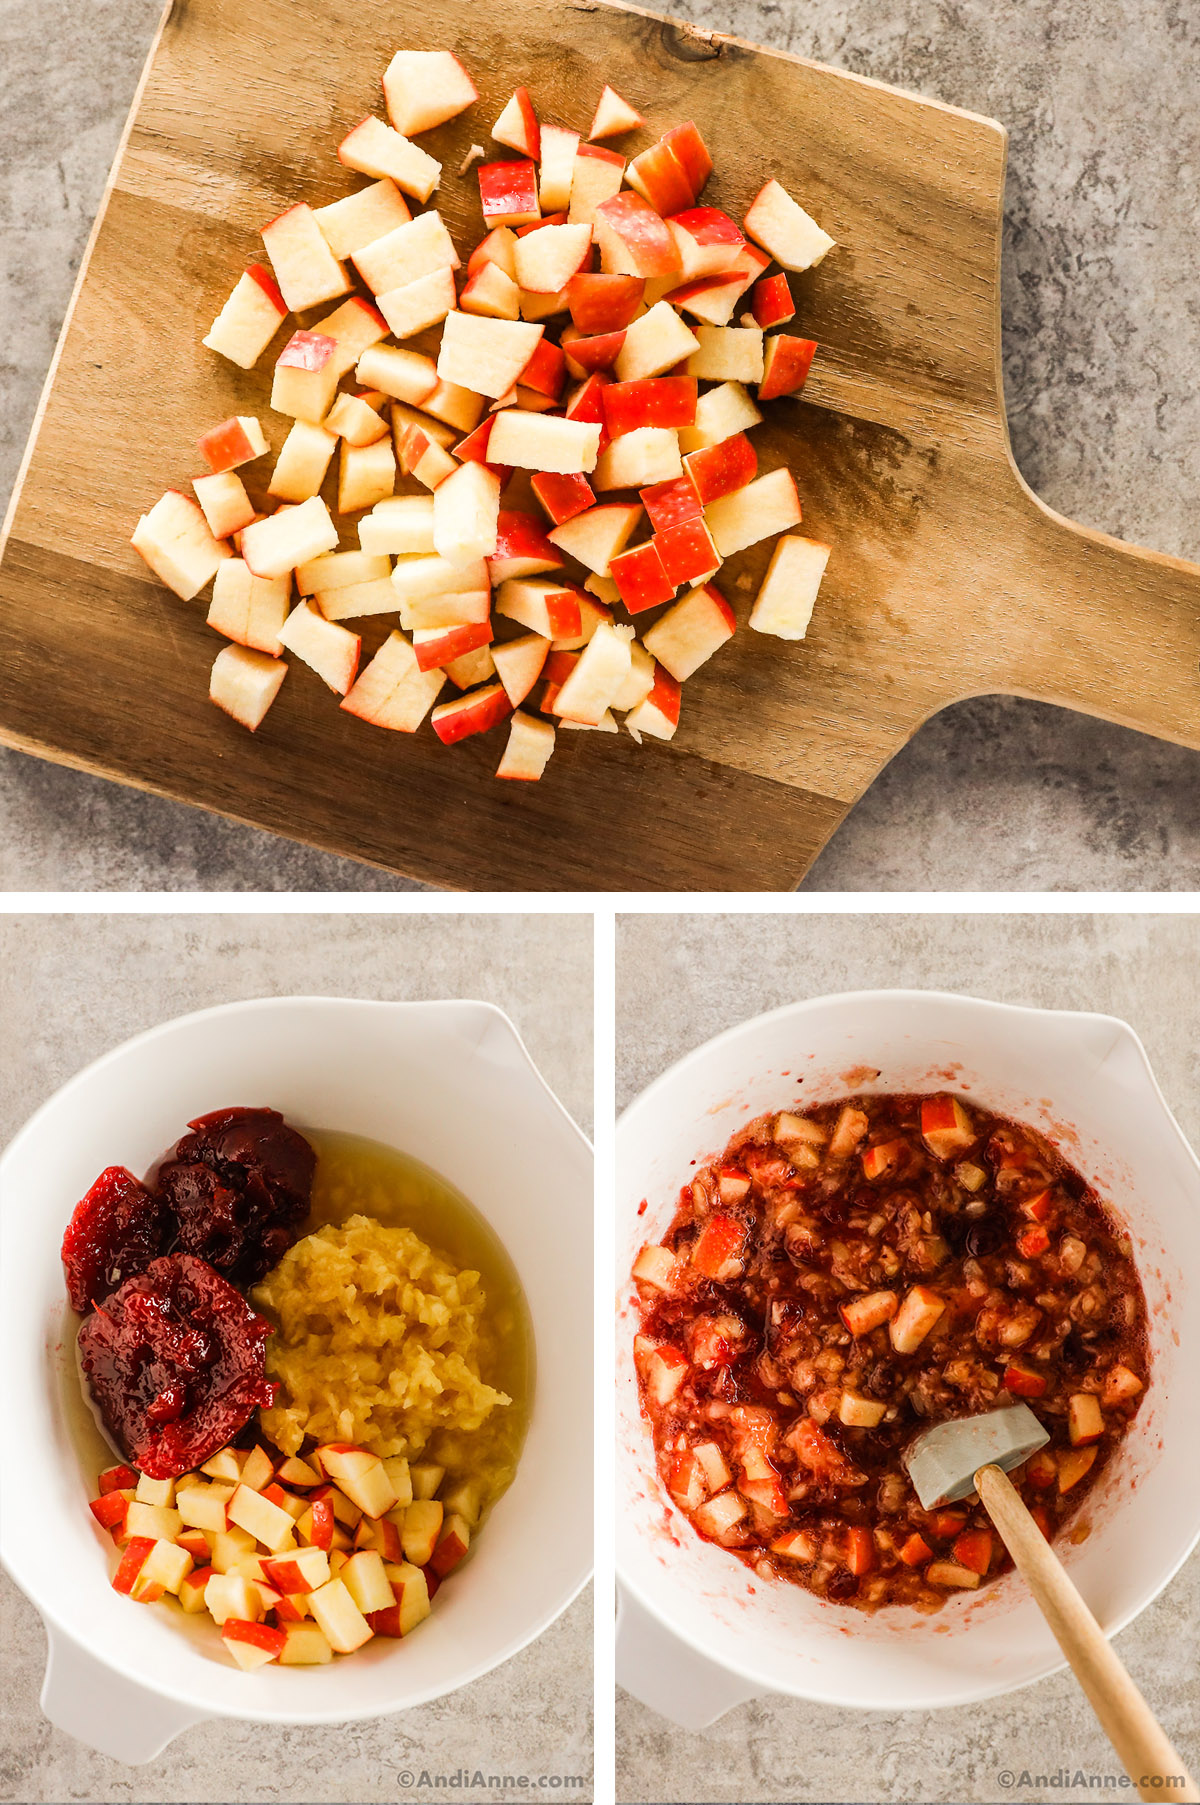 Chopped apple on a cutting board, and a bowl with crushed pineapple, cranberry sauce, chopped apple. Then a bowl of them mixed together.